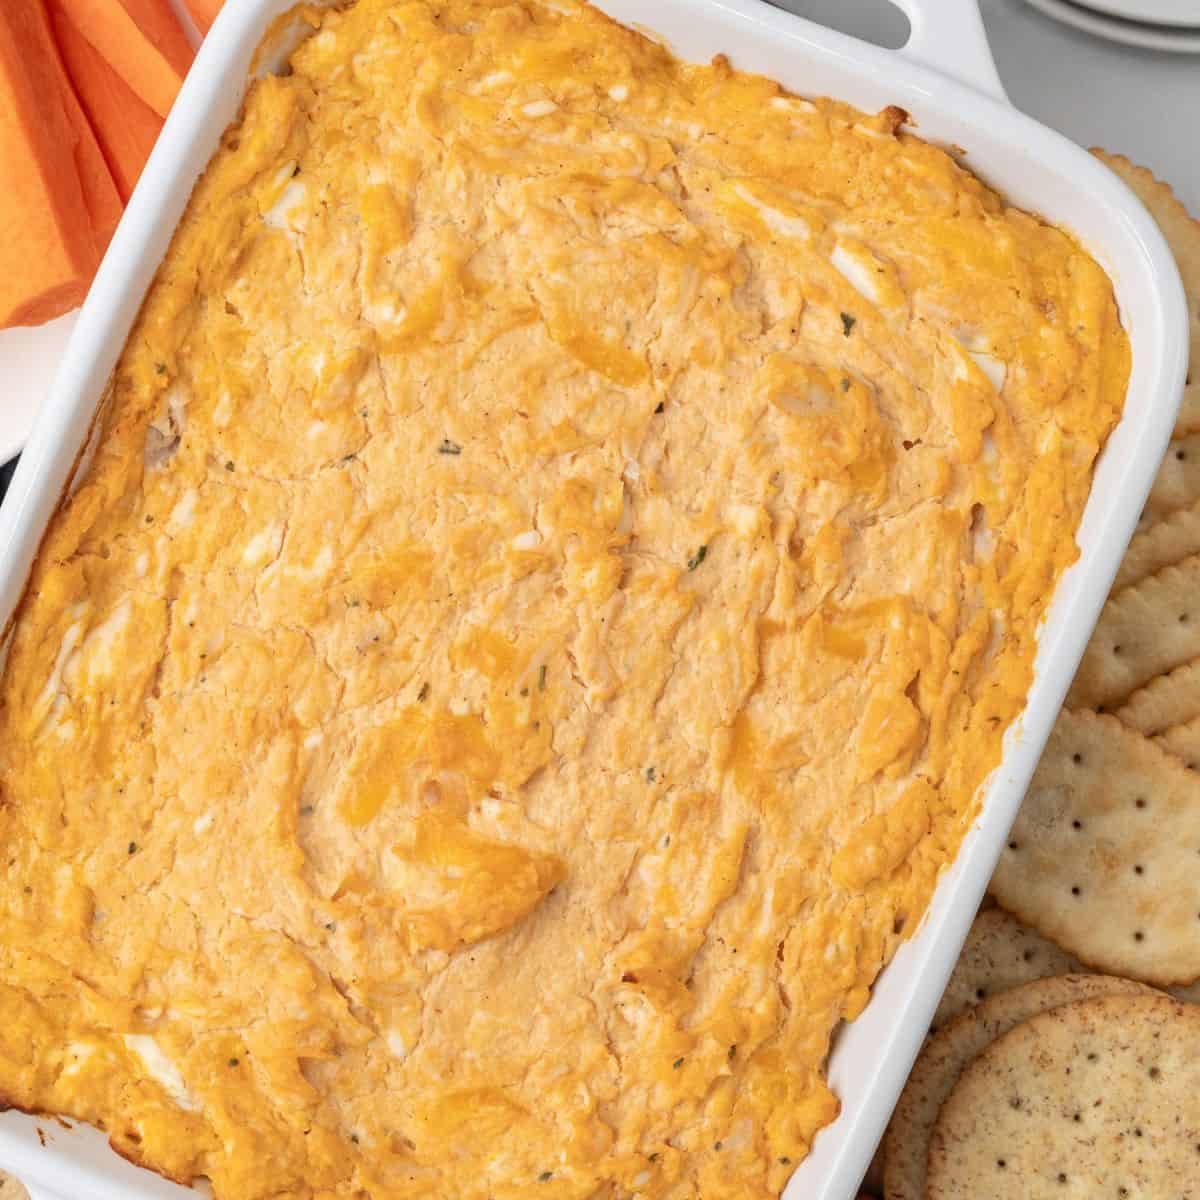 Creamy cheesy hot wing dip in a white dish with crackers, perfect for a snack or appetizer.